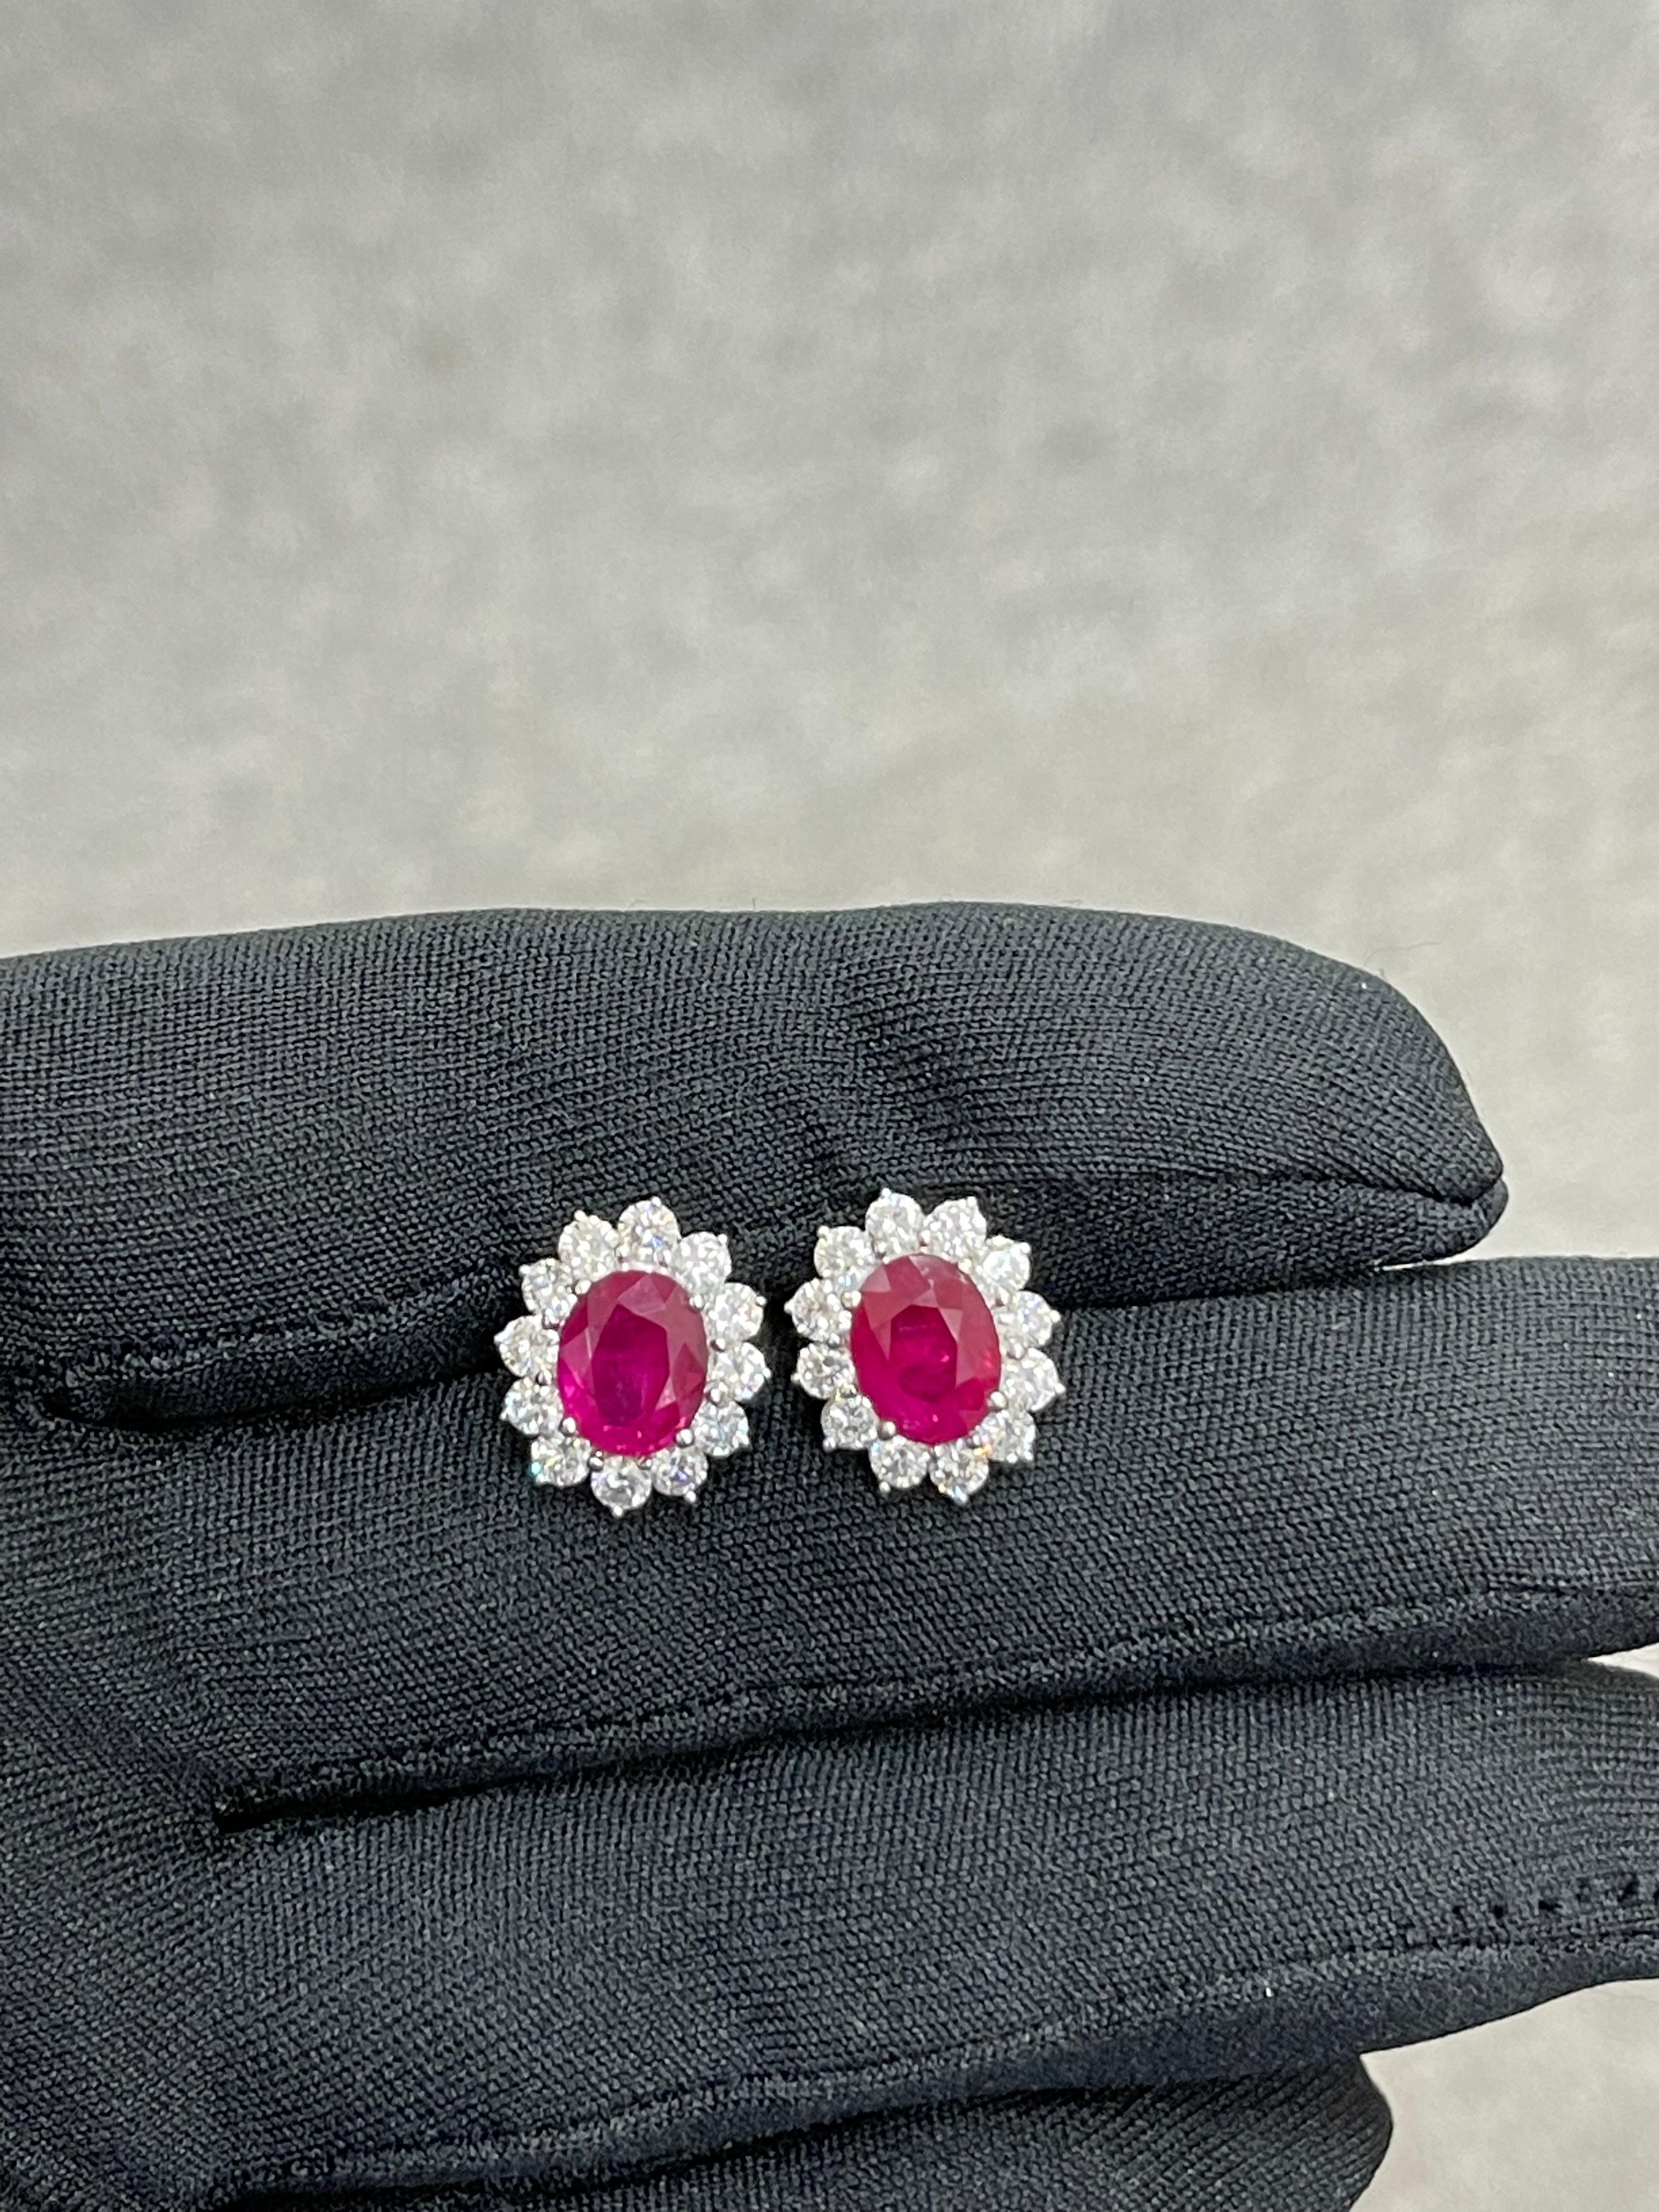 Modern Vivid Red Ruby 4.00 CTW & Diamond Stud Earrings, Close to Pigeon Blood Red